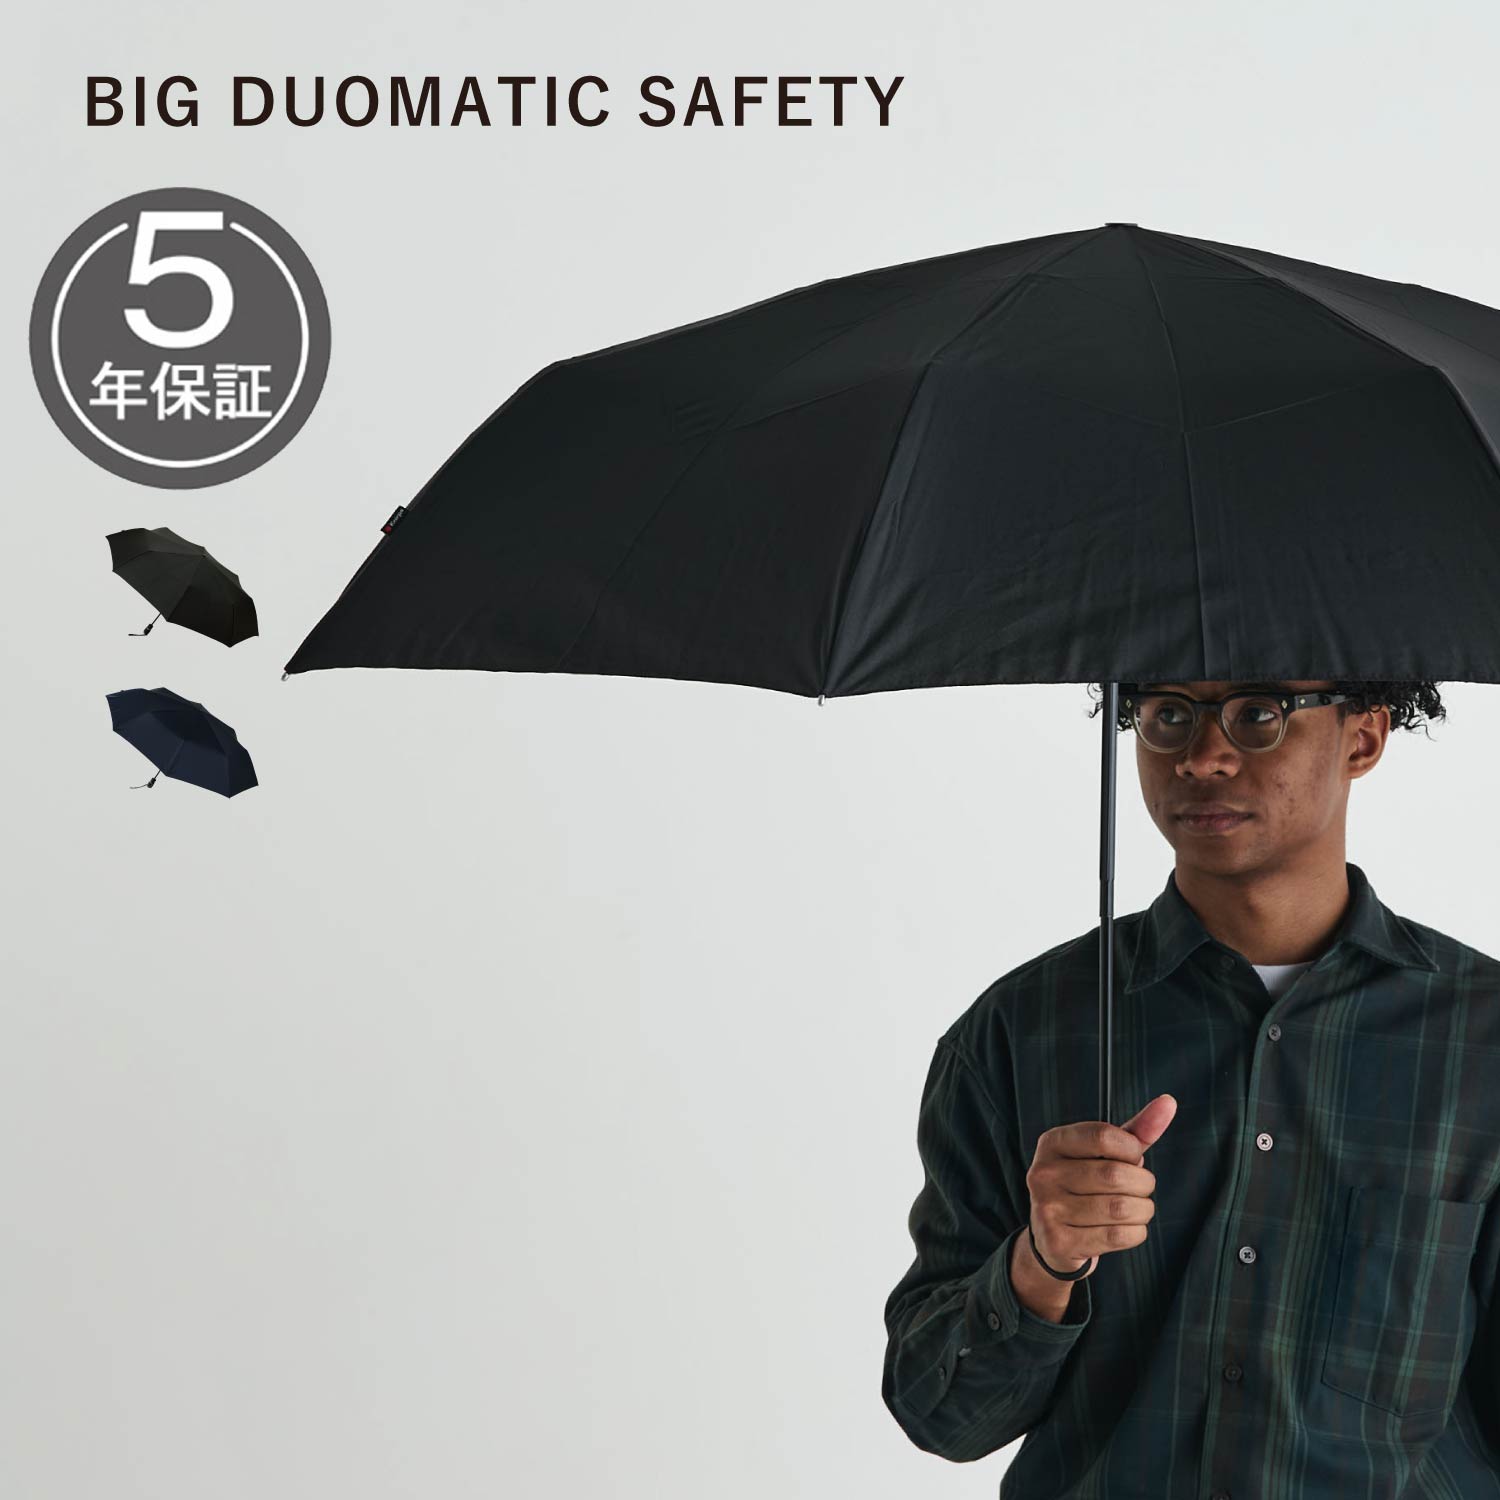 Knirps BIG DUOMATIC SAFETY クニルプス 自動開閉傘 折りたたみ傘 折り畳み傘 軽量 コンパクト ビッグ ..